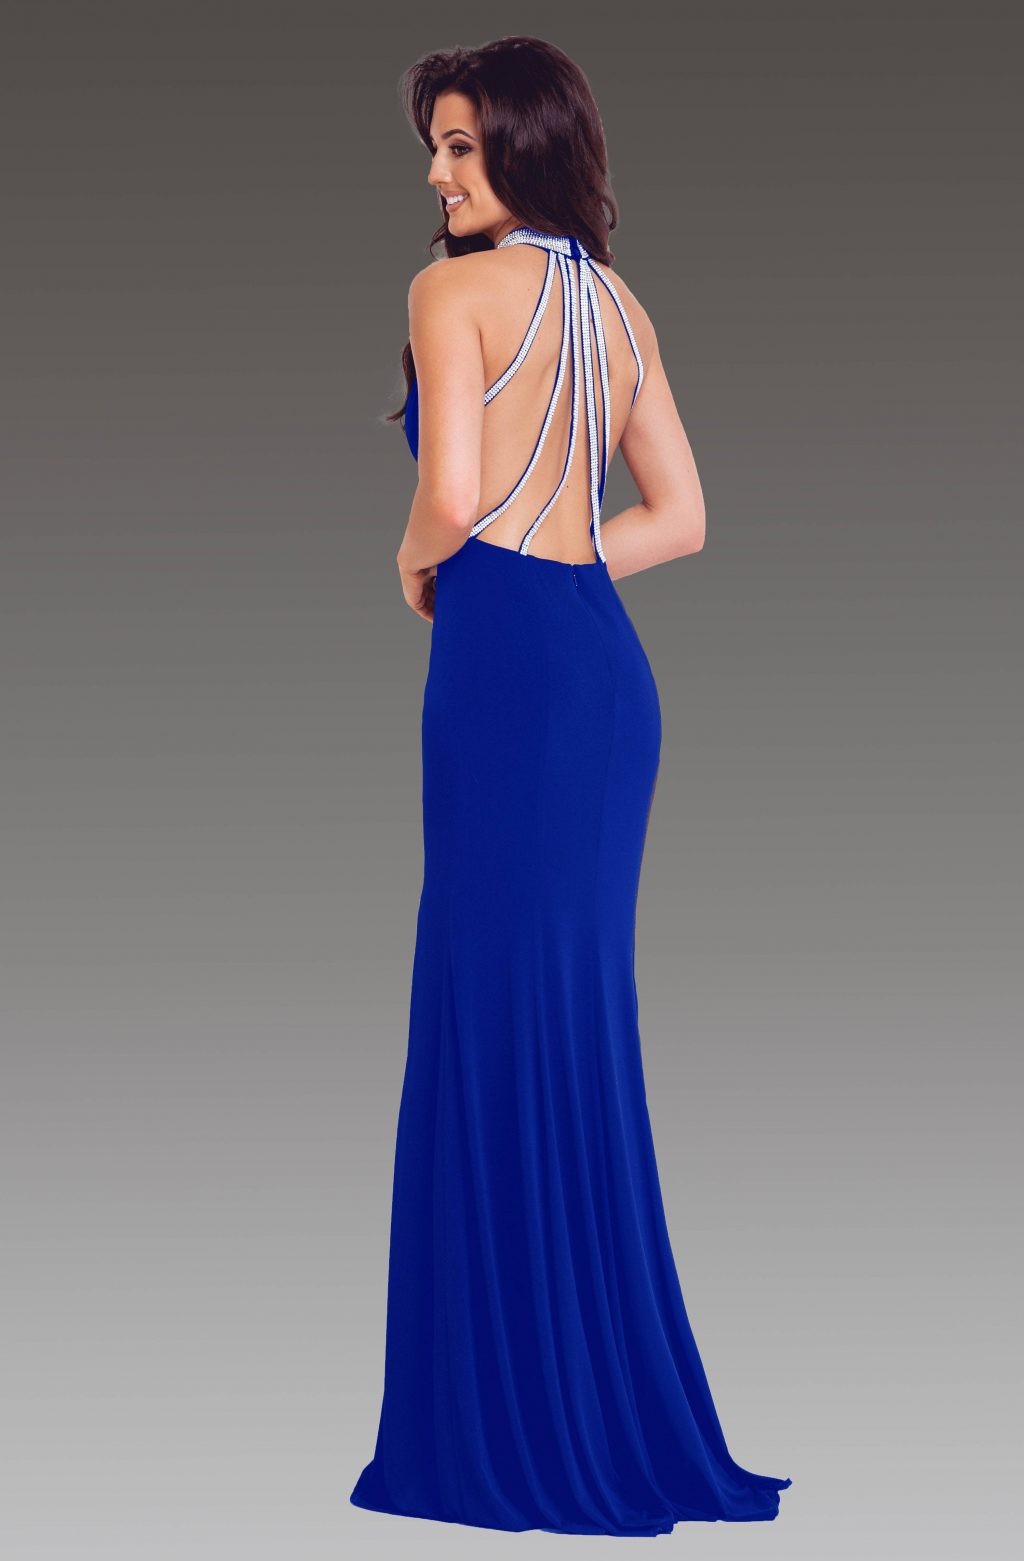 Full length halter style dress. 8986872 - Catherines of Partick